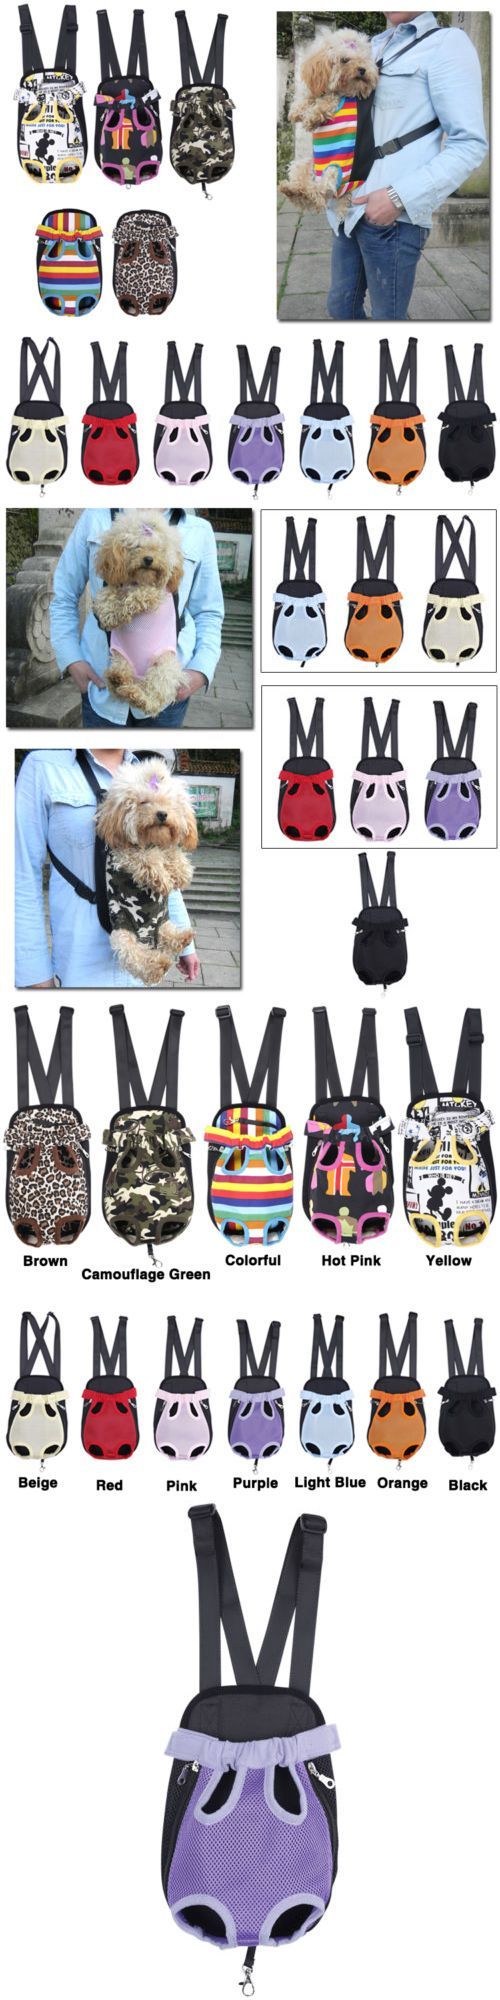 Dog Cat Nylon Pet Puppy Dog Carrier Backpack  - Exclusively on #priceabate #priceabateAnimalsDog! BUY IT NOW ONLY $